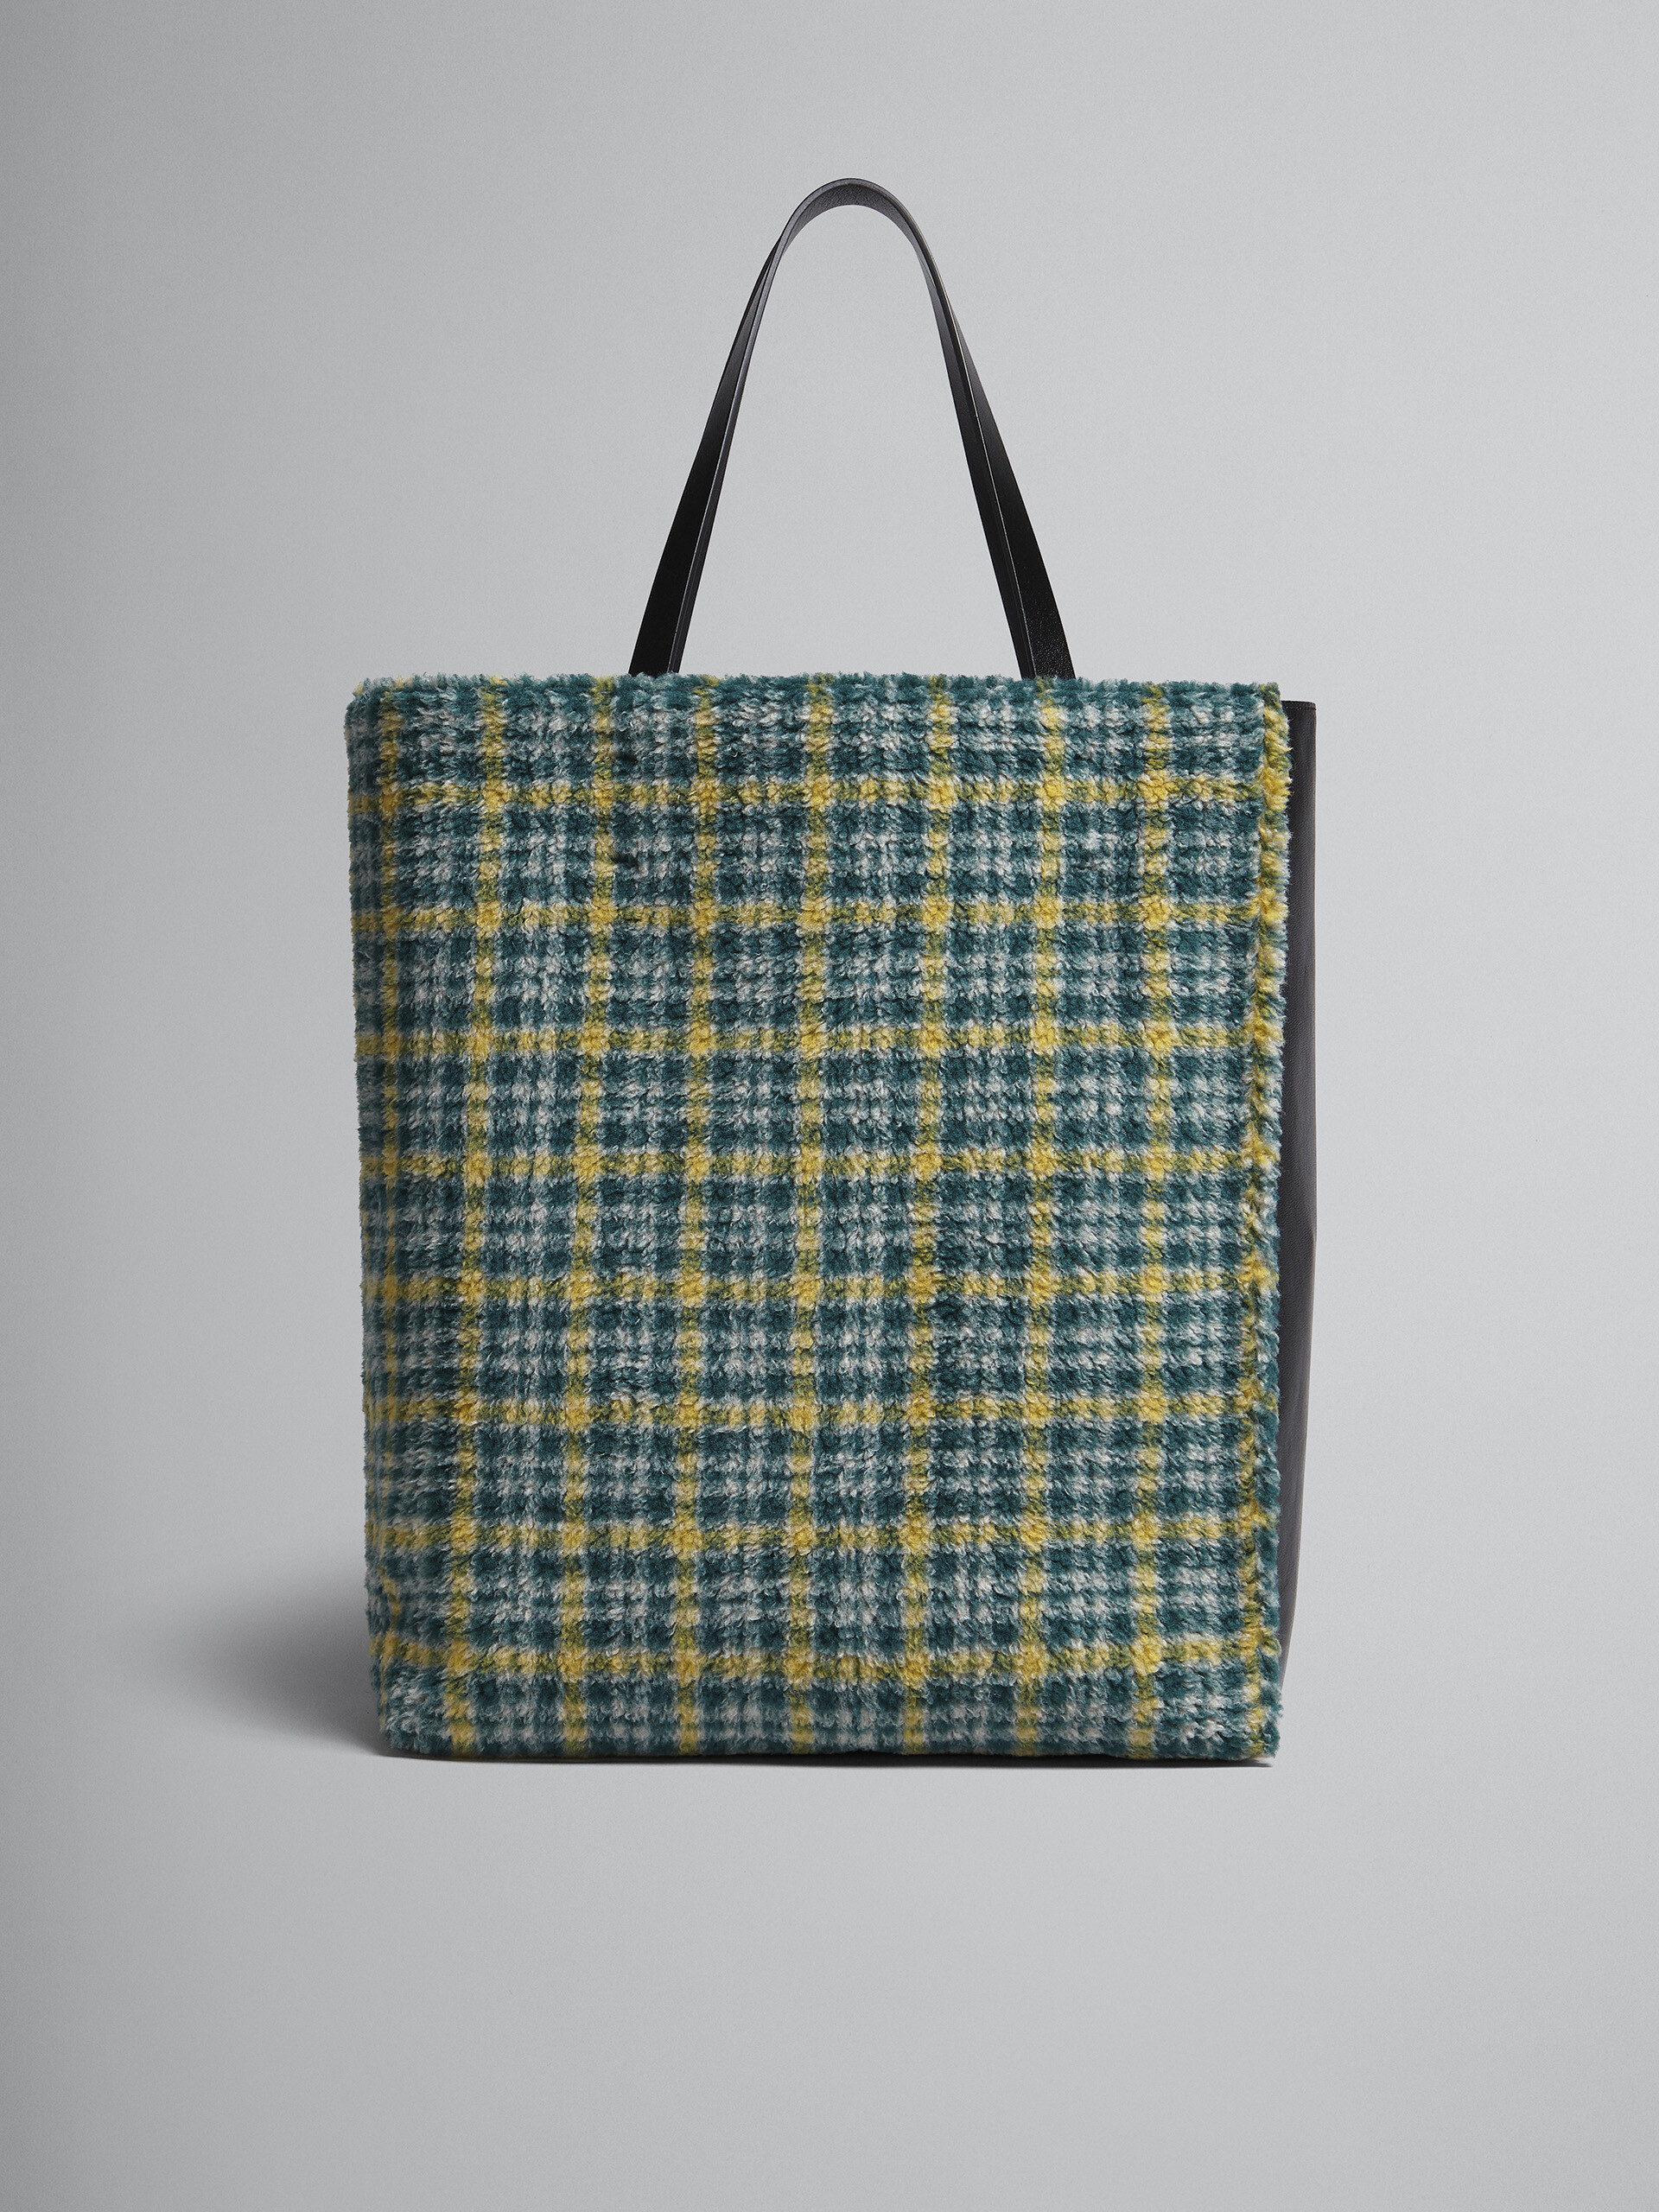 MUSEO SOFT large bag in green check fabric - Shopping Bags - Image 1